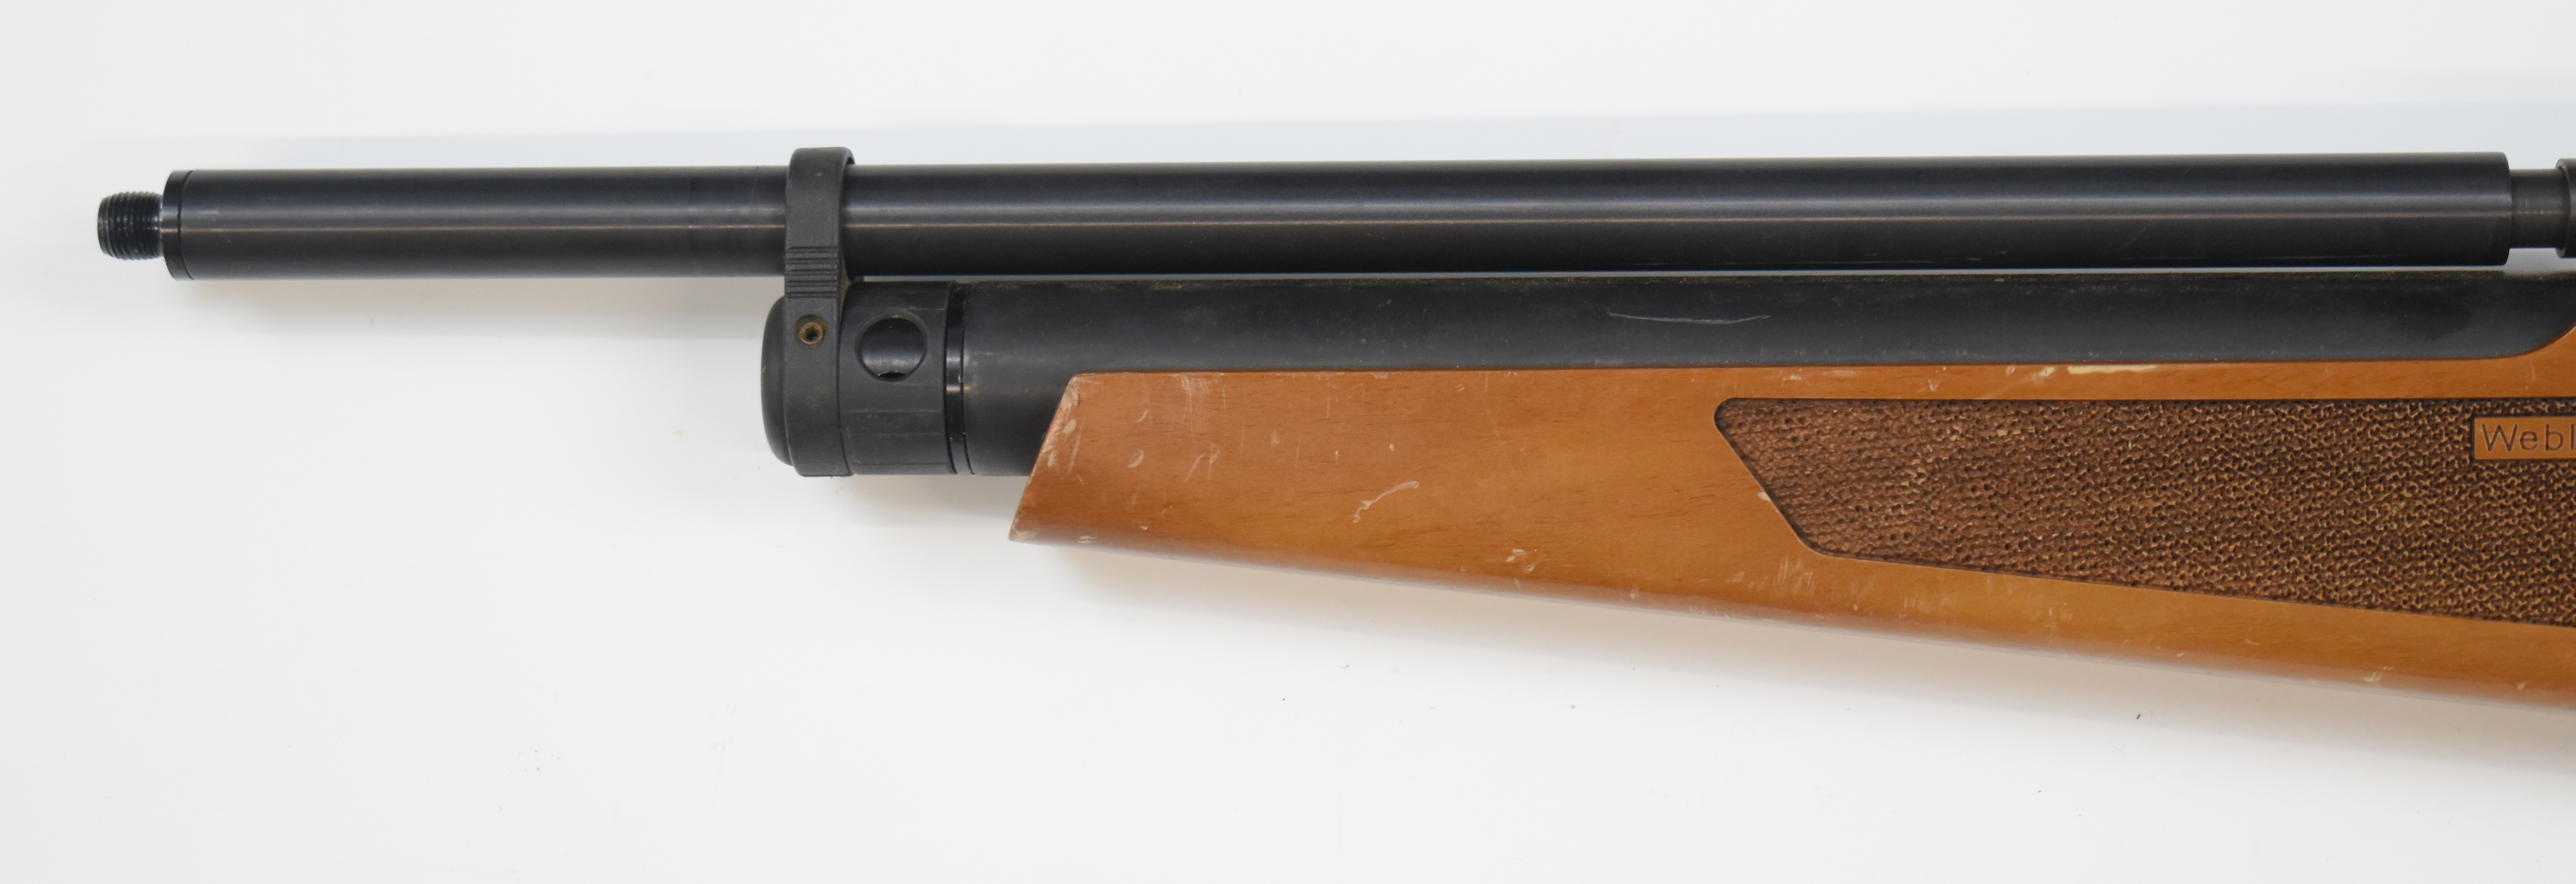 Webley Raider Classic .22 PCP air rifle with textured semi-pistol grip and forend, raised cheek - Image 10 of 10